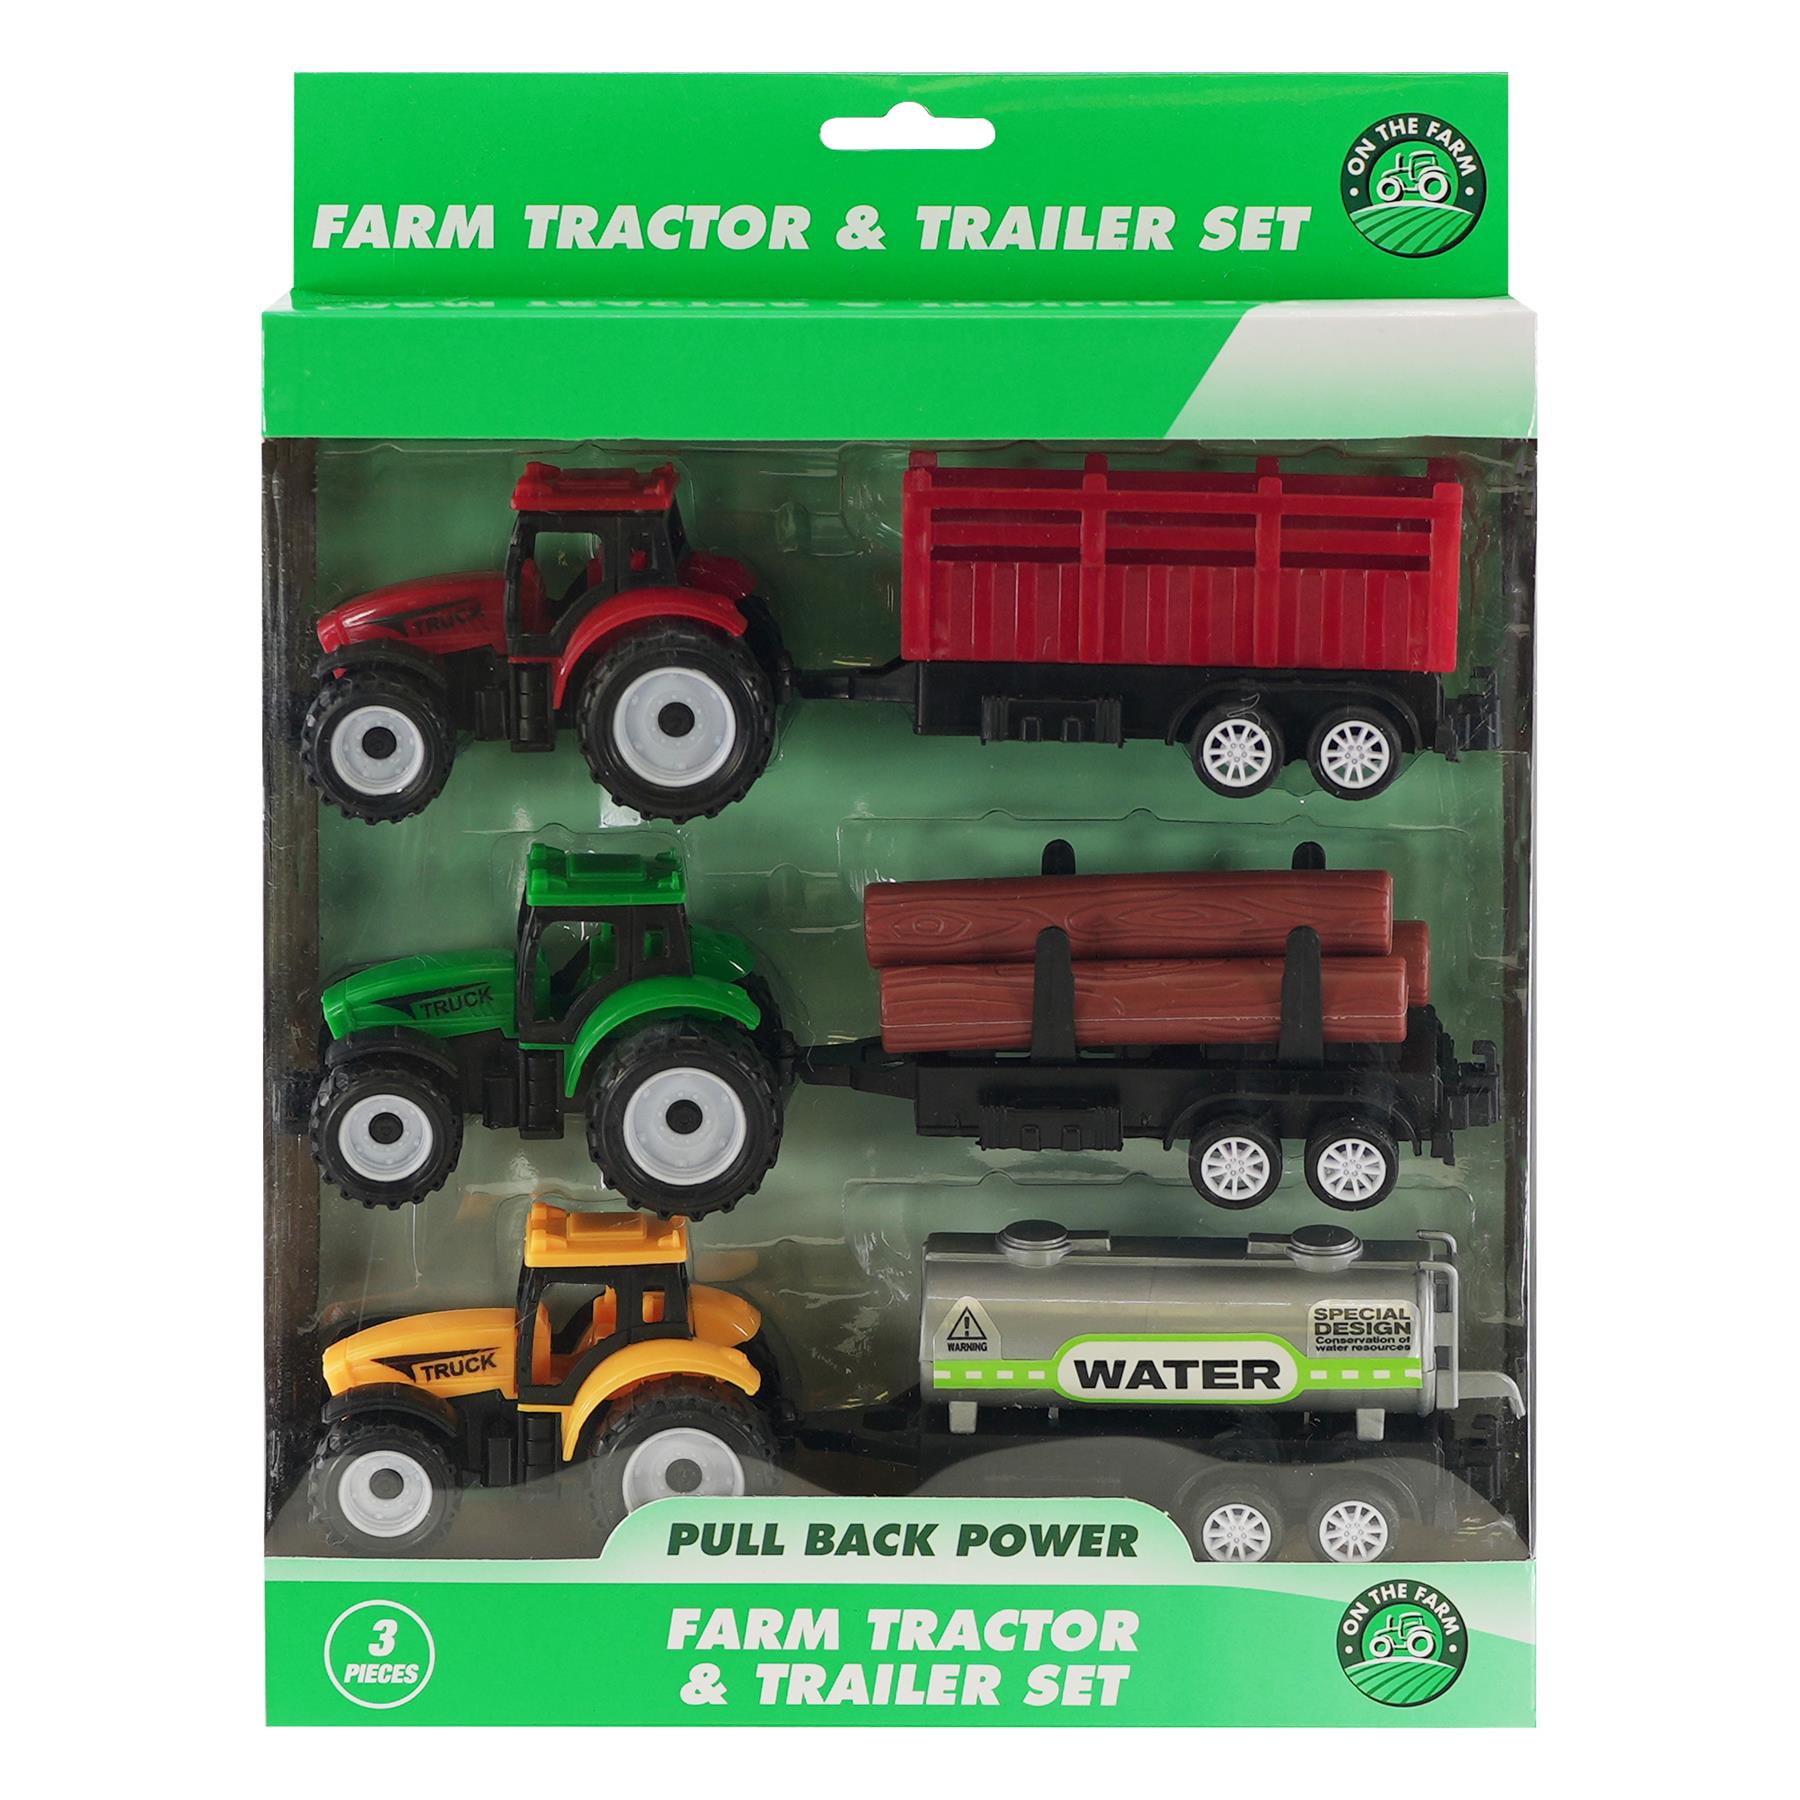 The Magic Toy Shop Farm Vehicle Farm Tractor and Trailer Playset